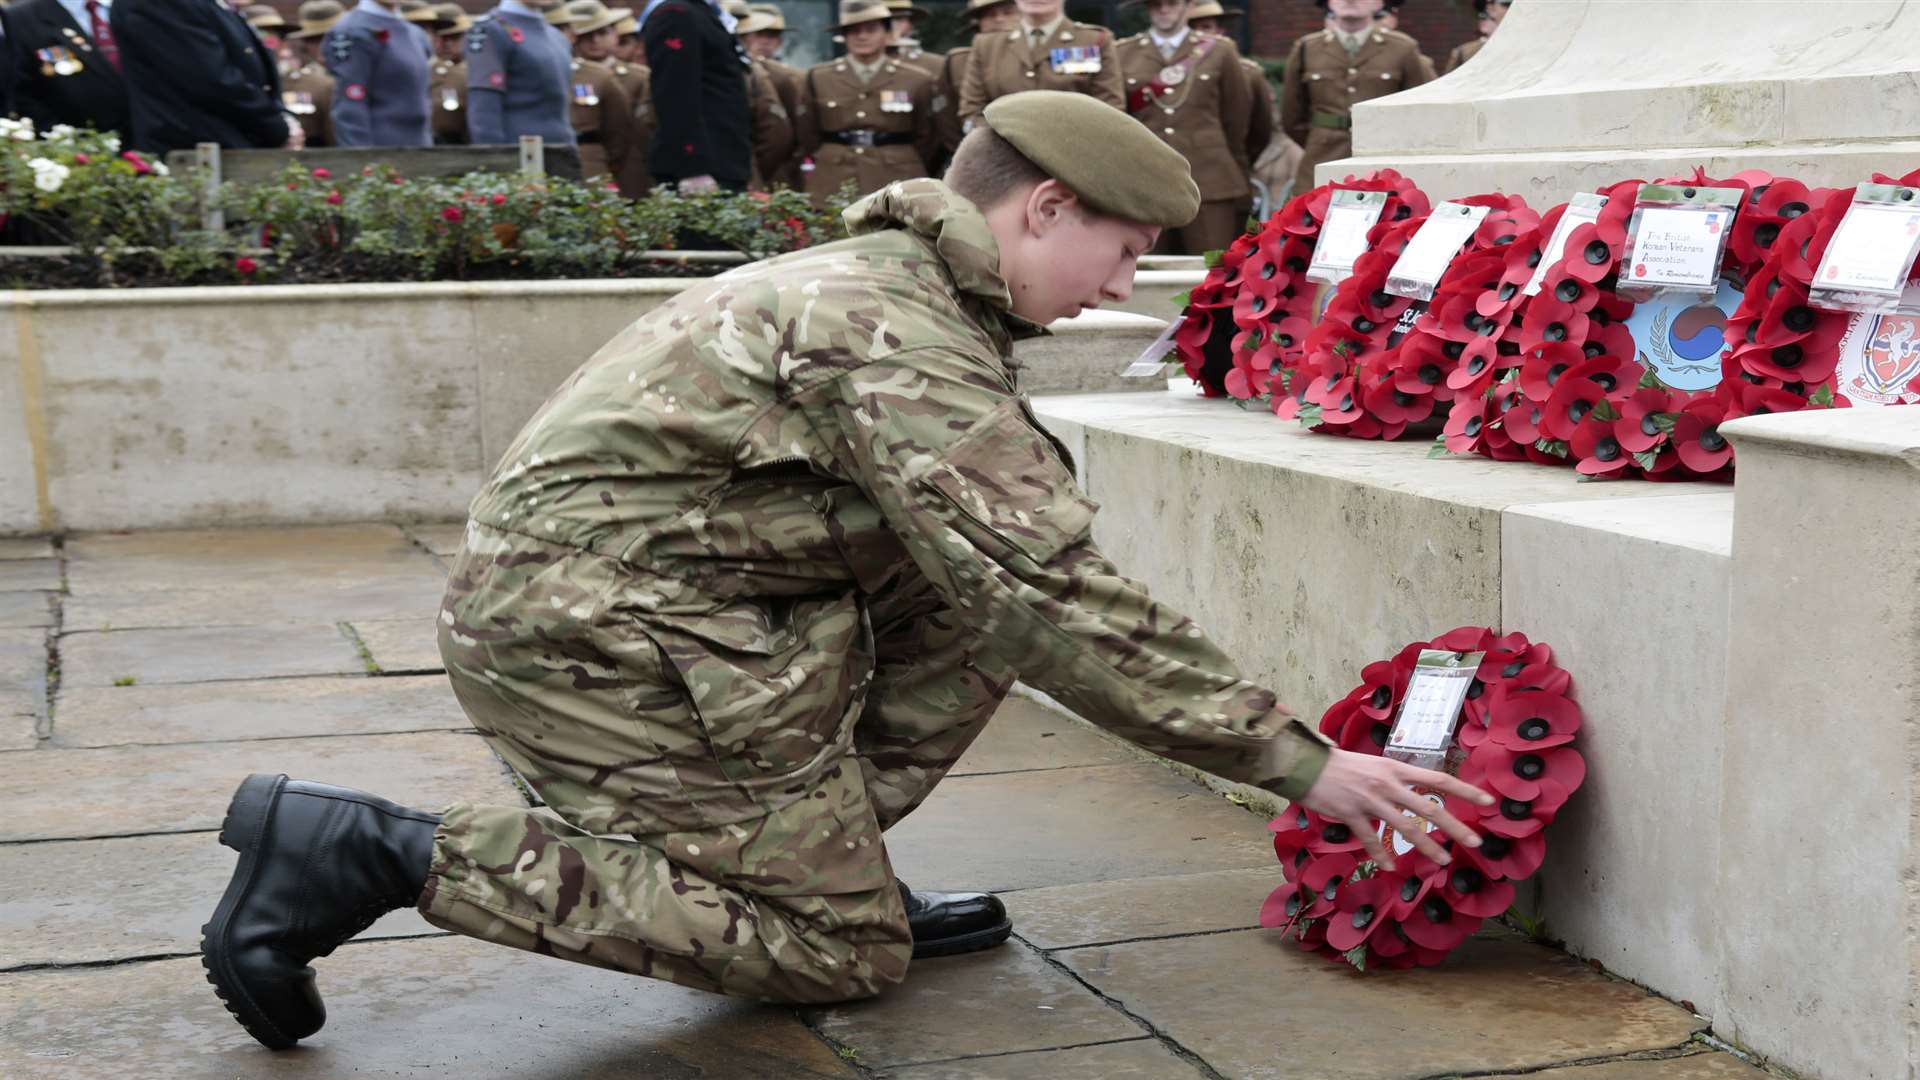 A cadet lays a wreath at the memorial near Maidstone West train station